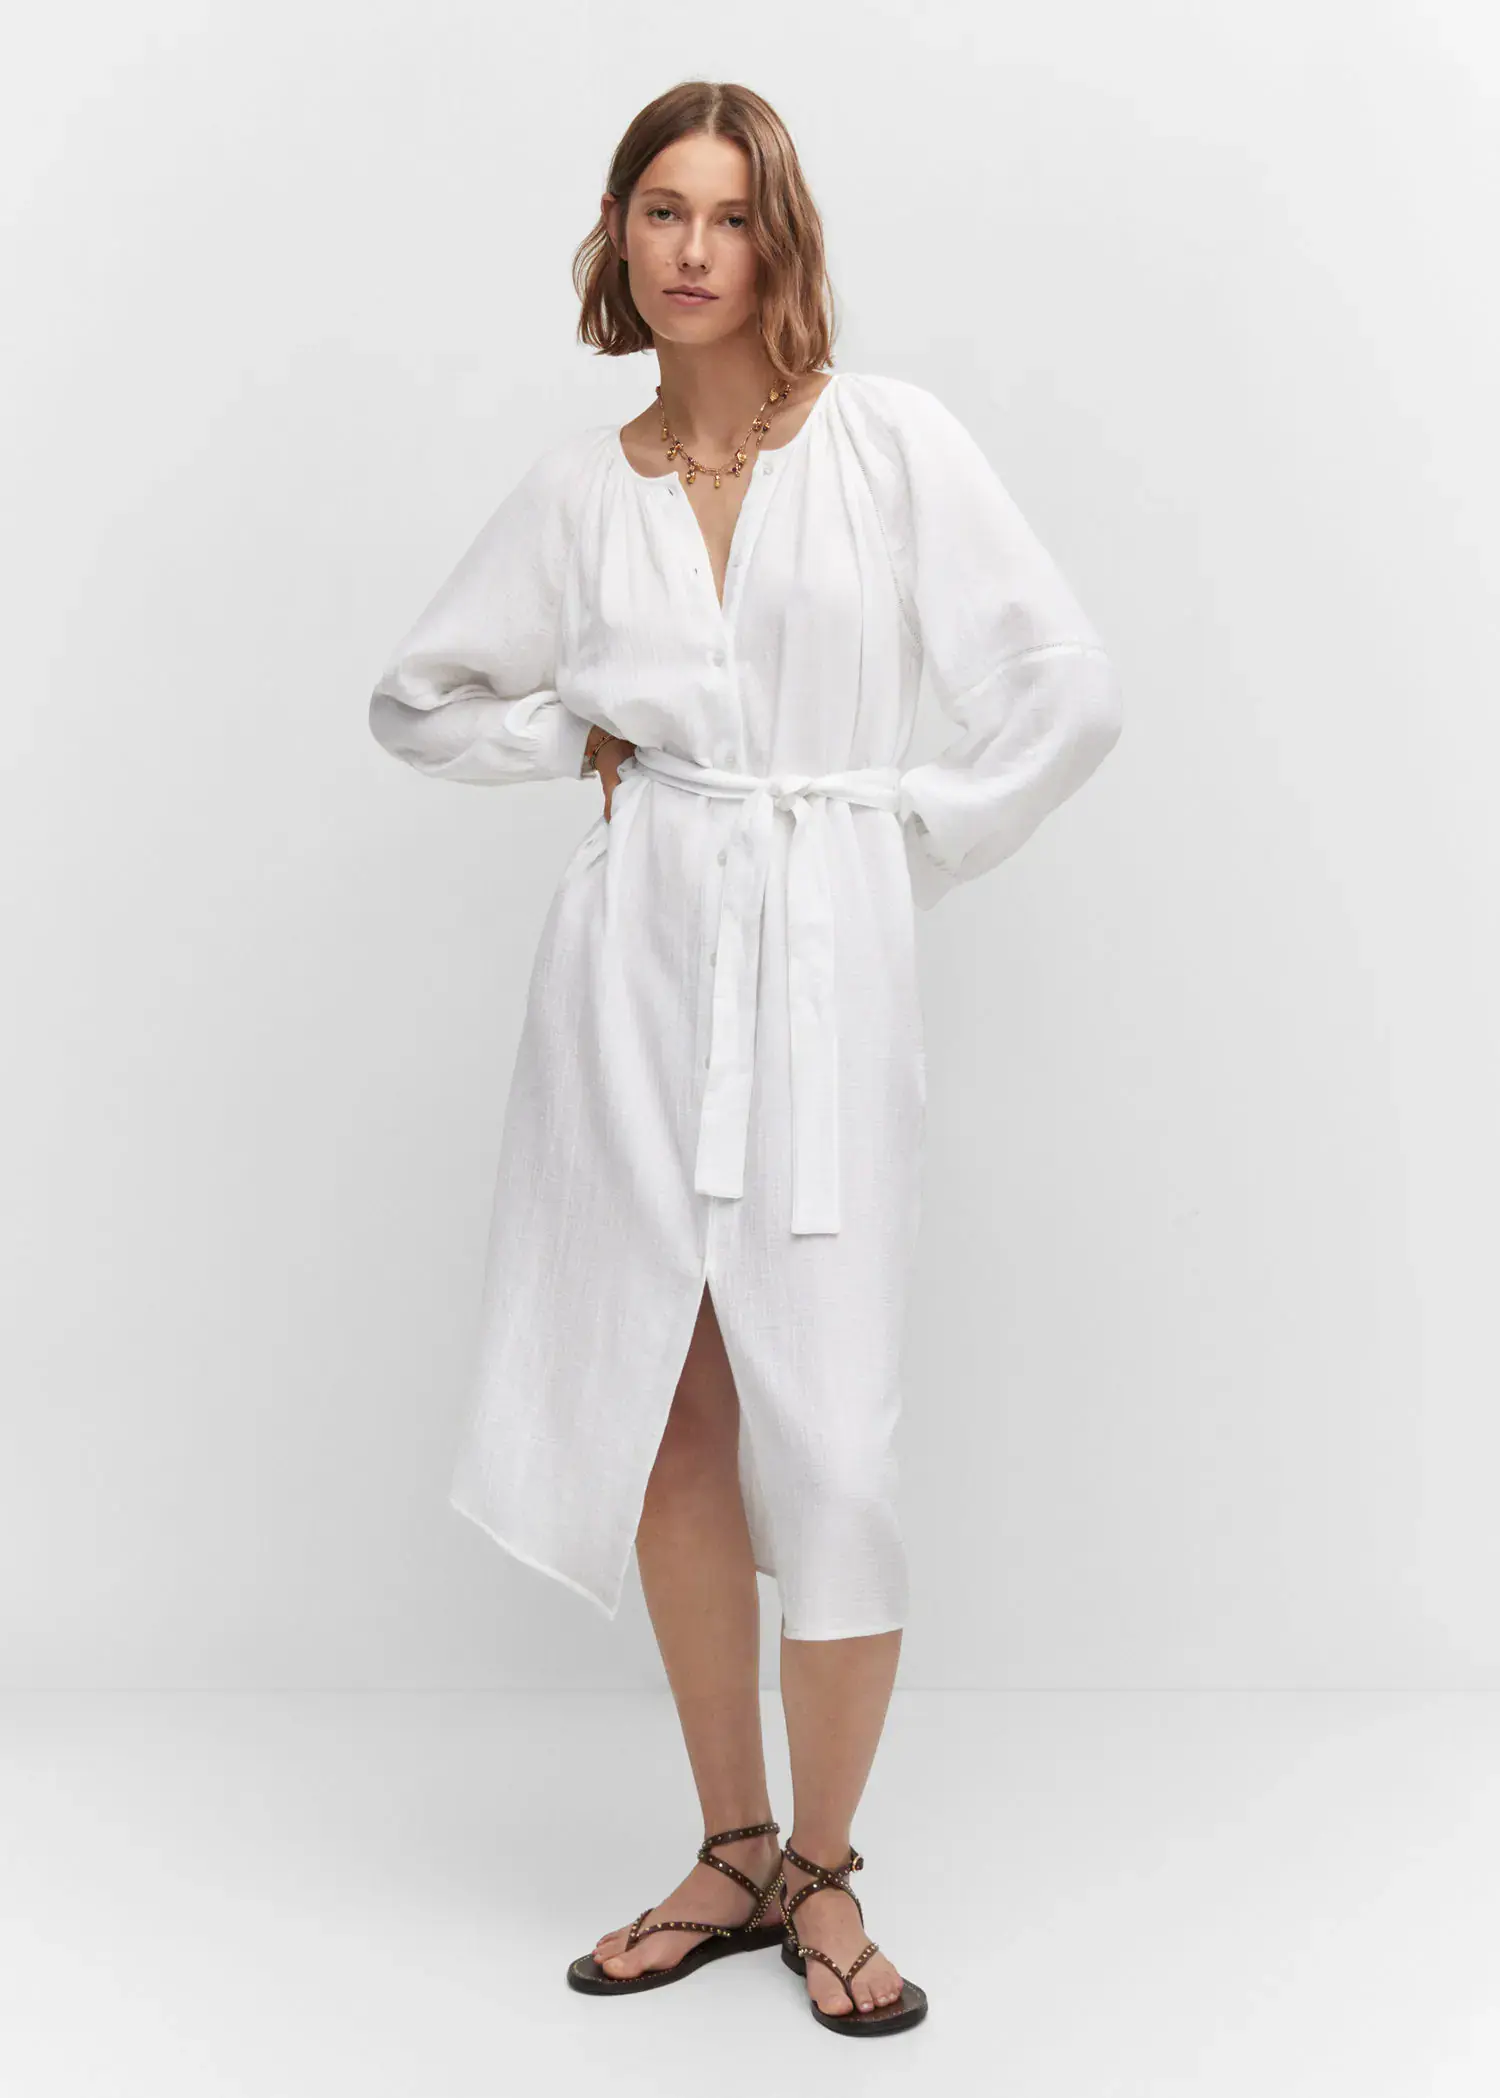 Mango Belt cotton dress. a woman wearing a white dress standing in front of a white wall. 